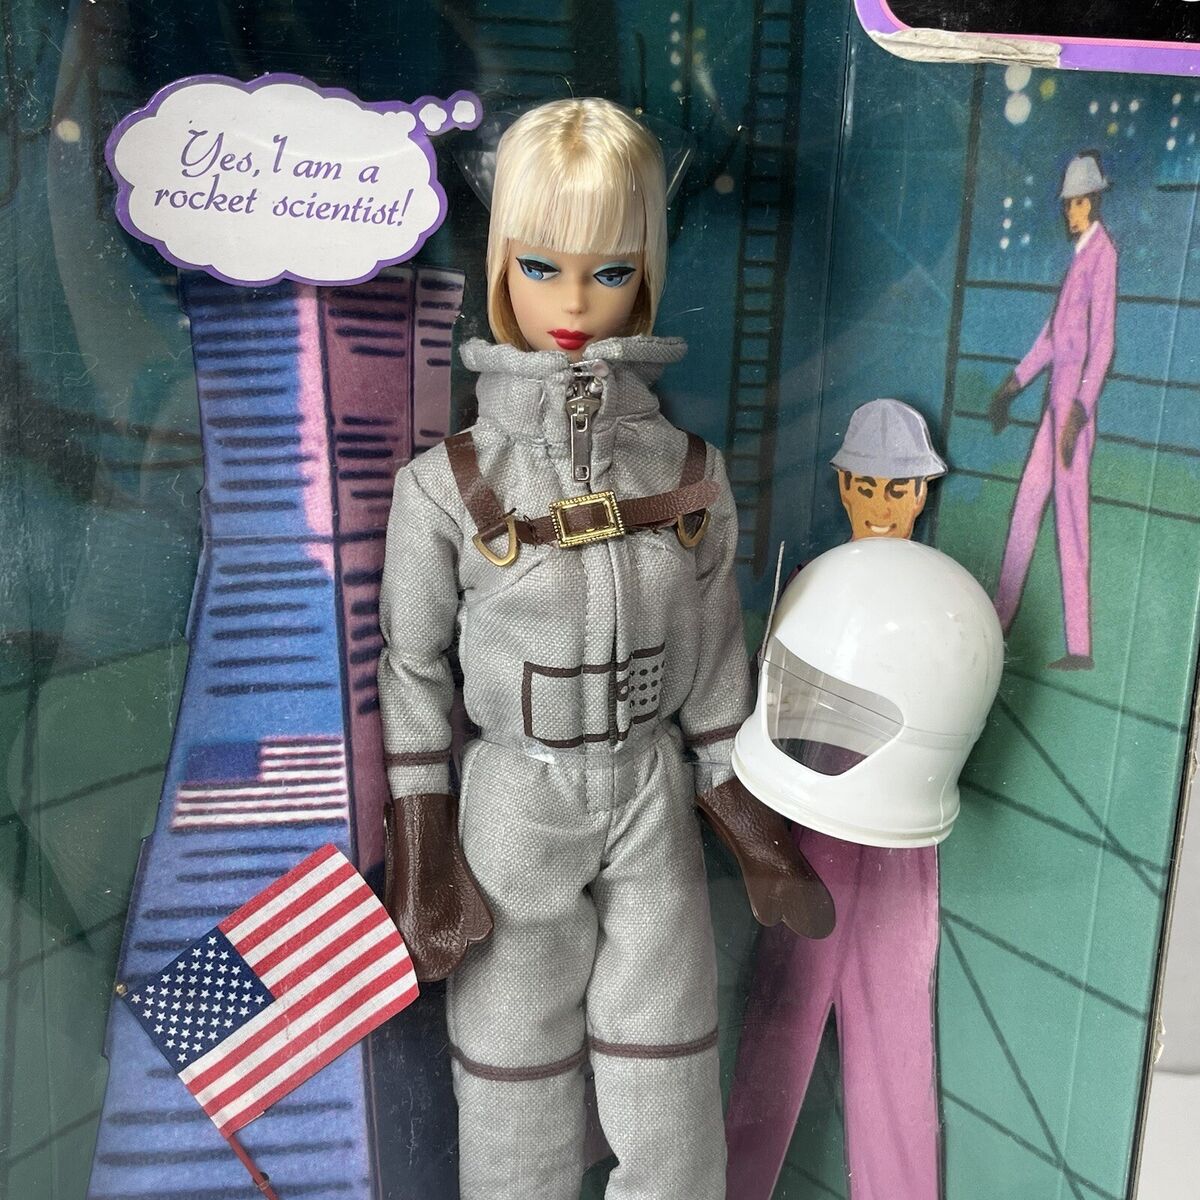 The first Miss Astronaut Barbie